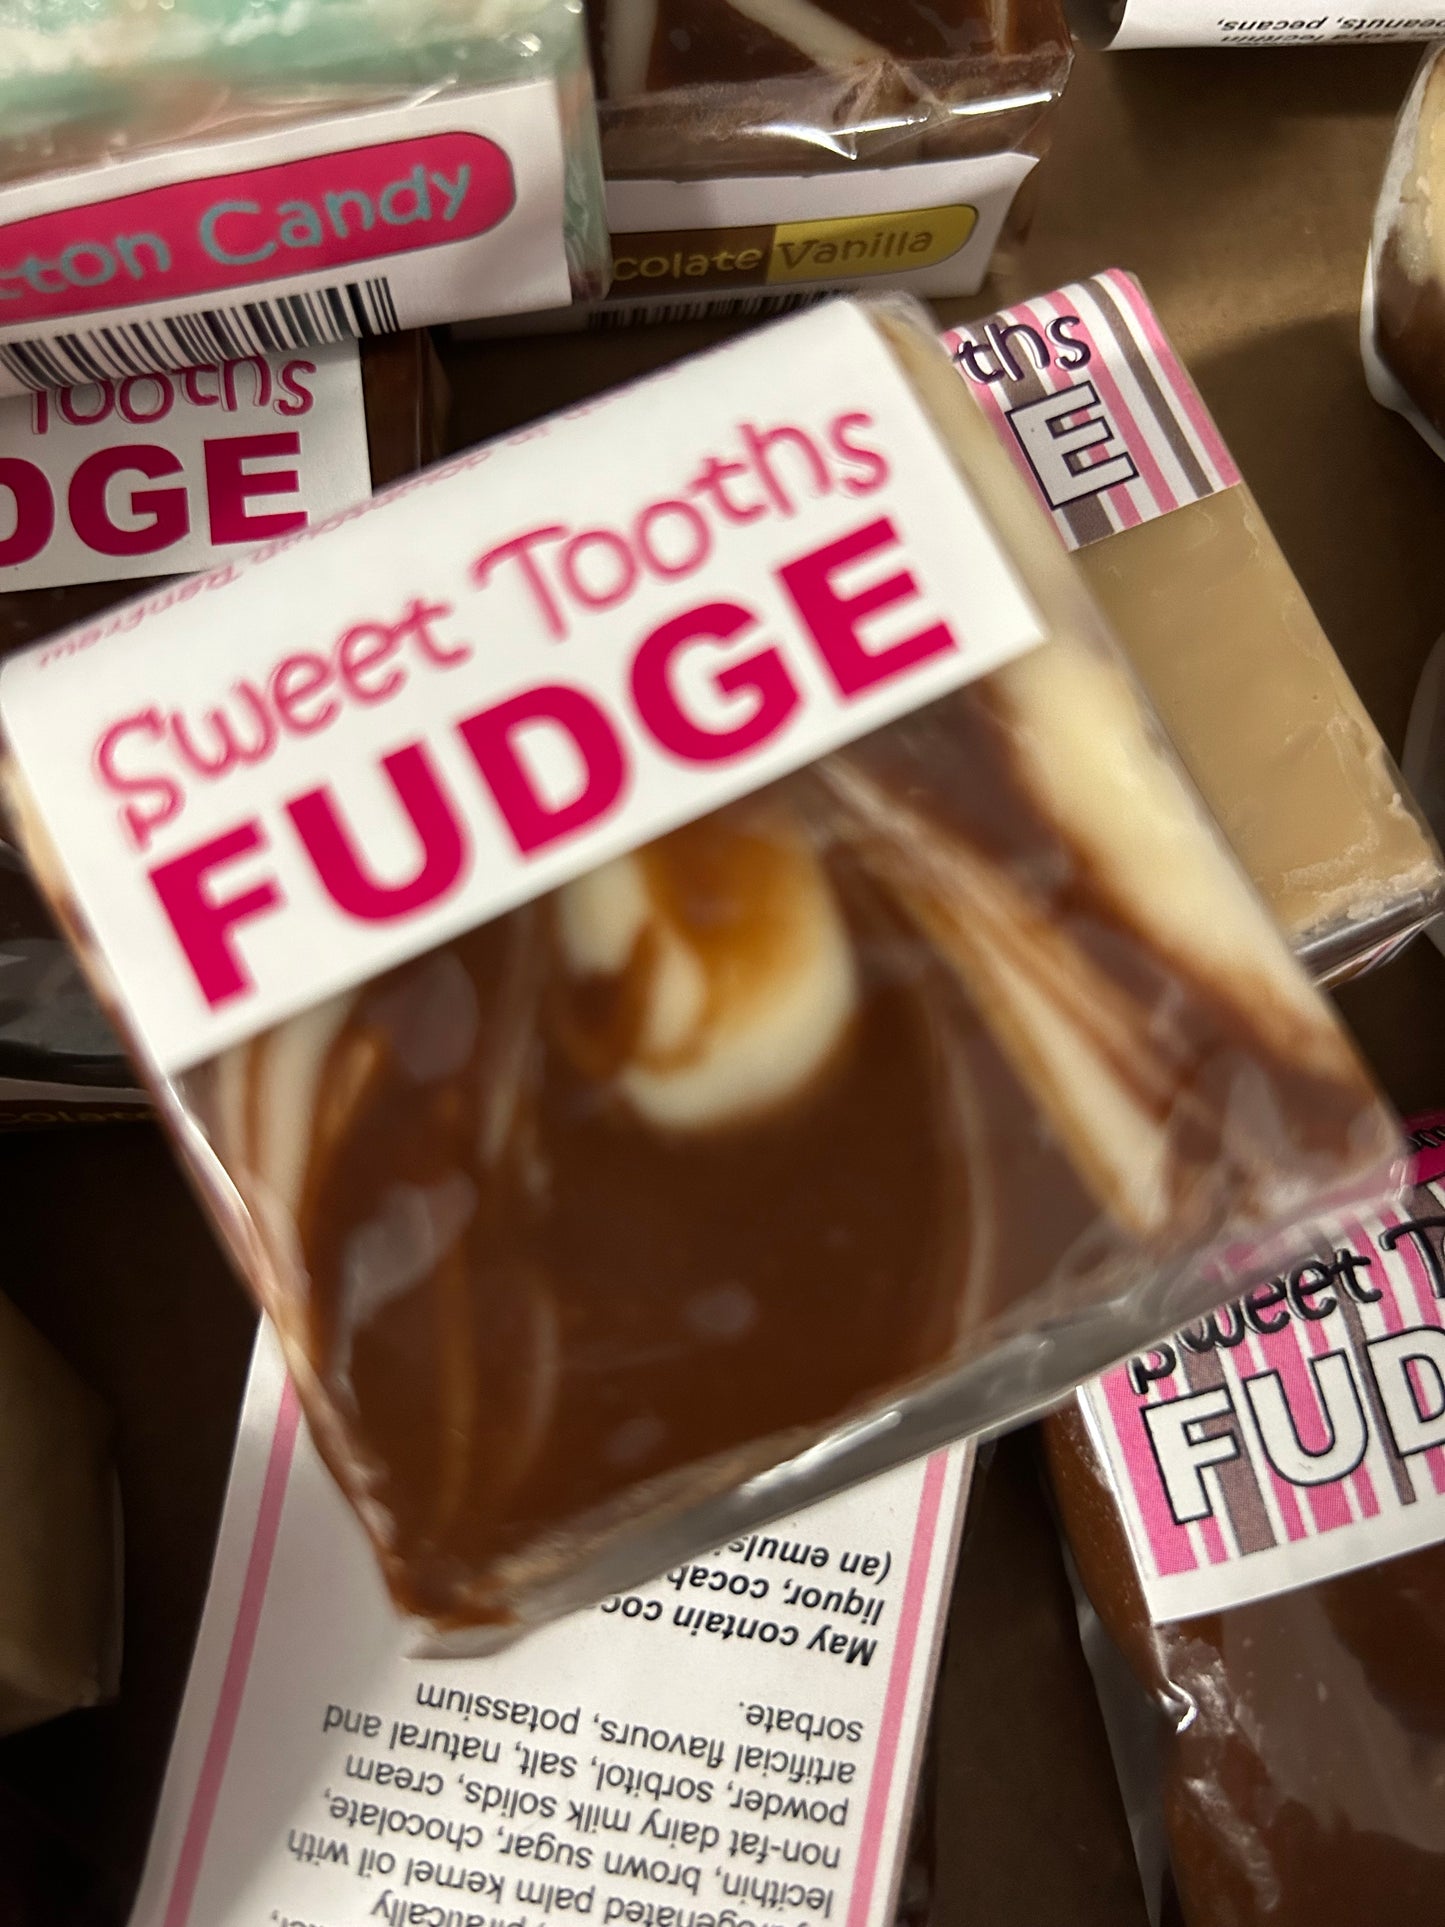 Sweet Tooth’s Fudge, 4 ounces, Assorted Flavours